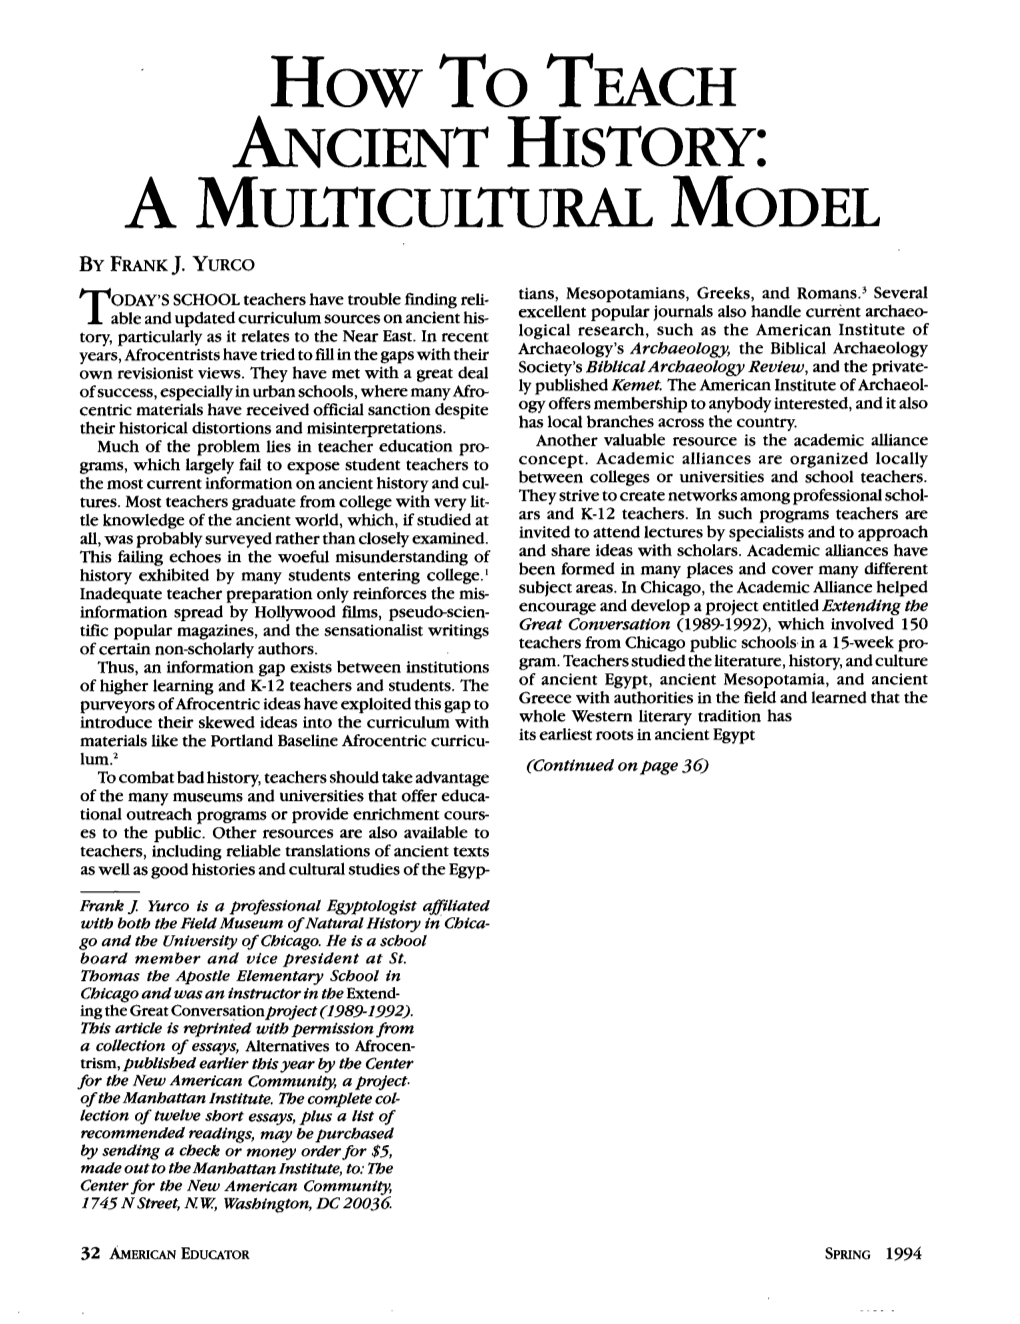 How to TEACH ANCIENT HISTORY: a MULTICULTURALMODEL by FRANK J